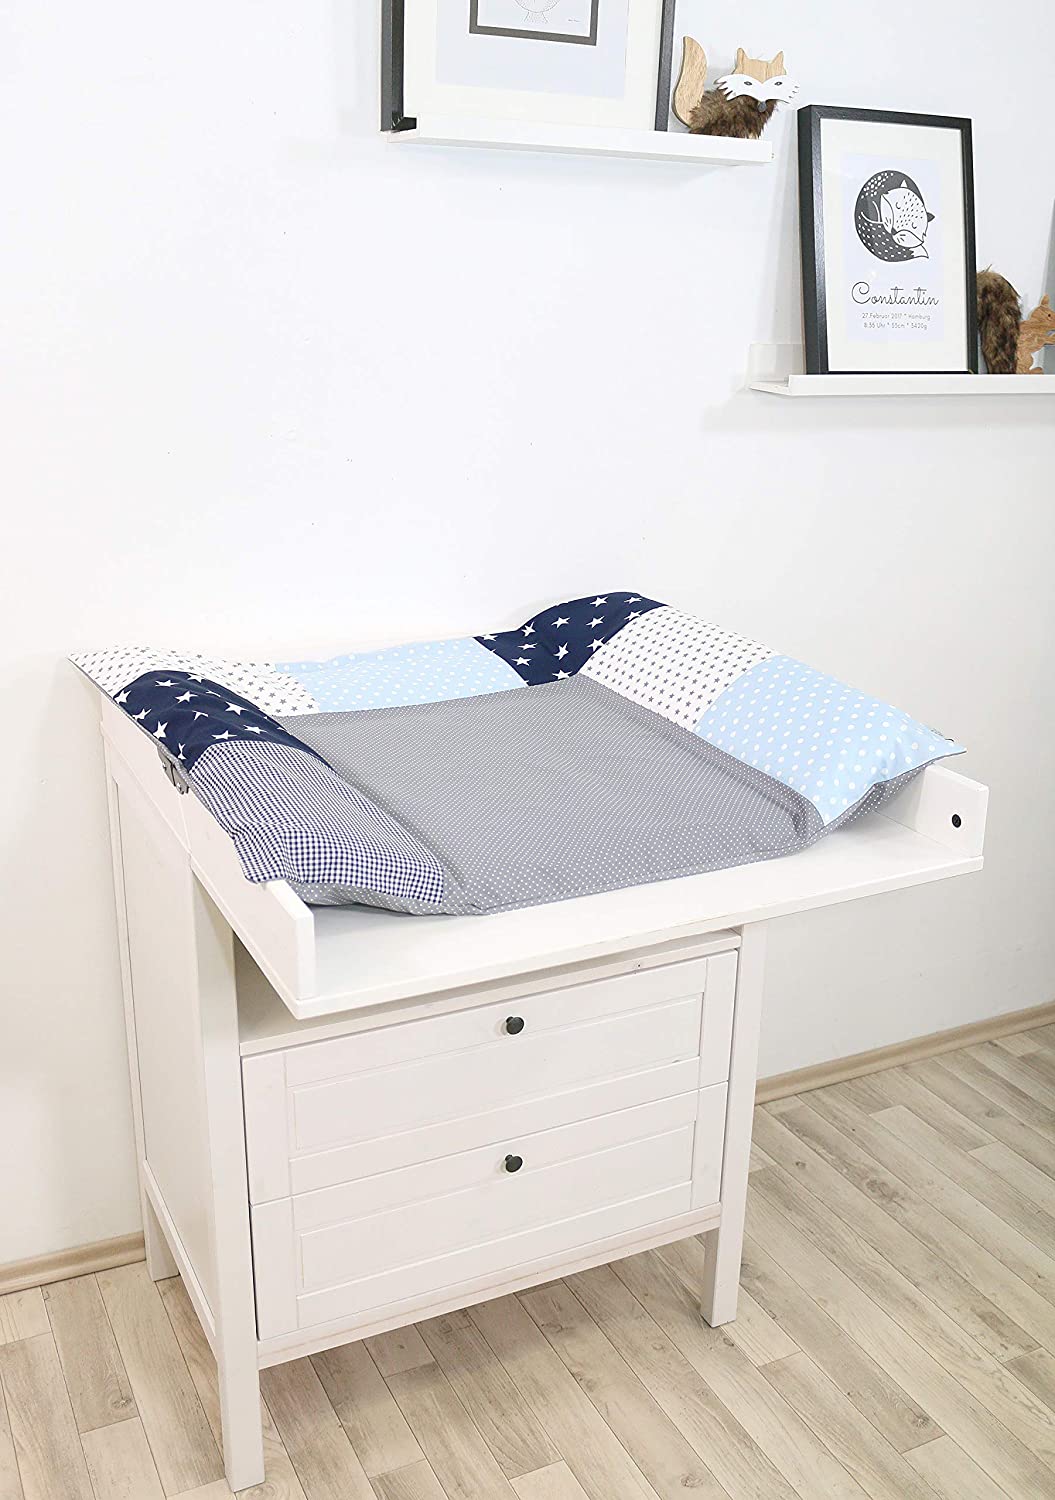 ULLENBOOM ® Changing Mat Cover 75 x 85 cm Anchor Blue (Made in EU) - Removable Cover for Changing Mat 85 x 75 cm, Baby Cover for Changing Mat Made of Cotton, Changing Cover for Changing Table